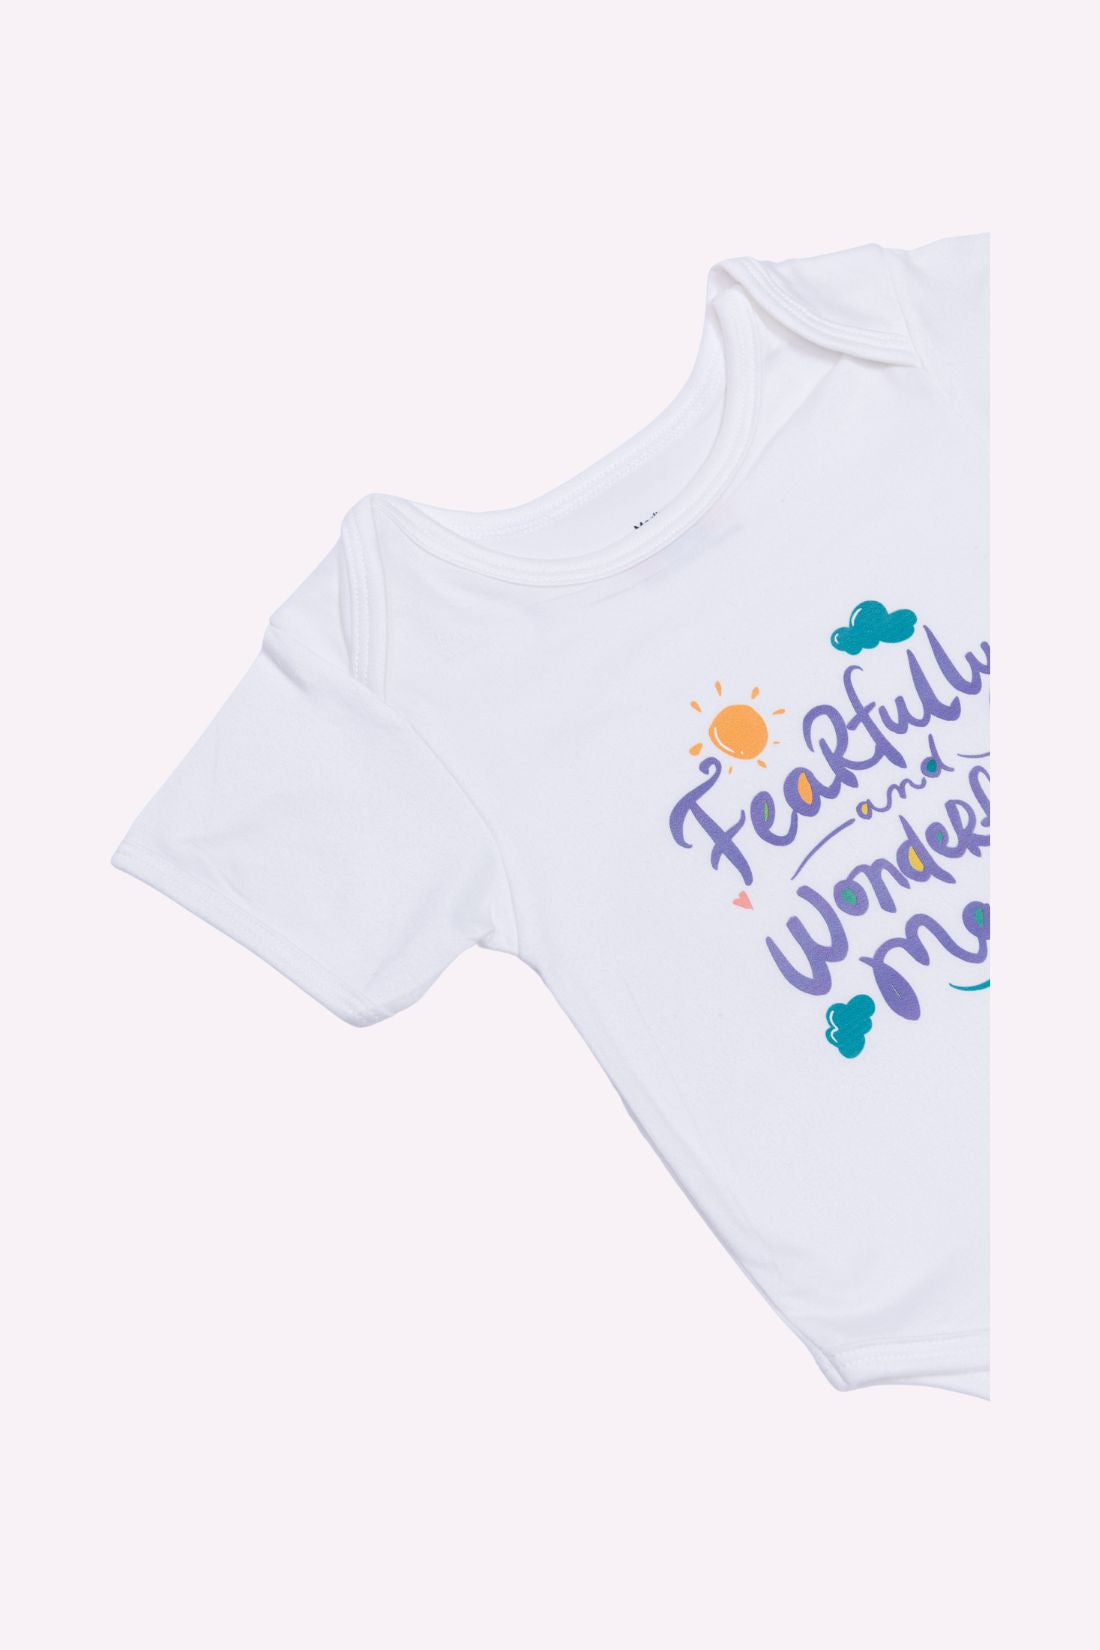 Fearfully and Wonderfully Made Play Onesie